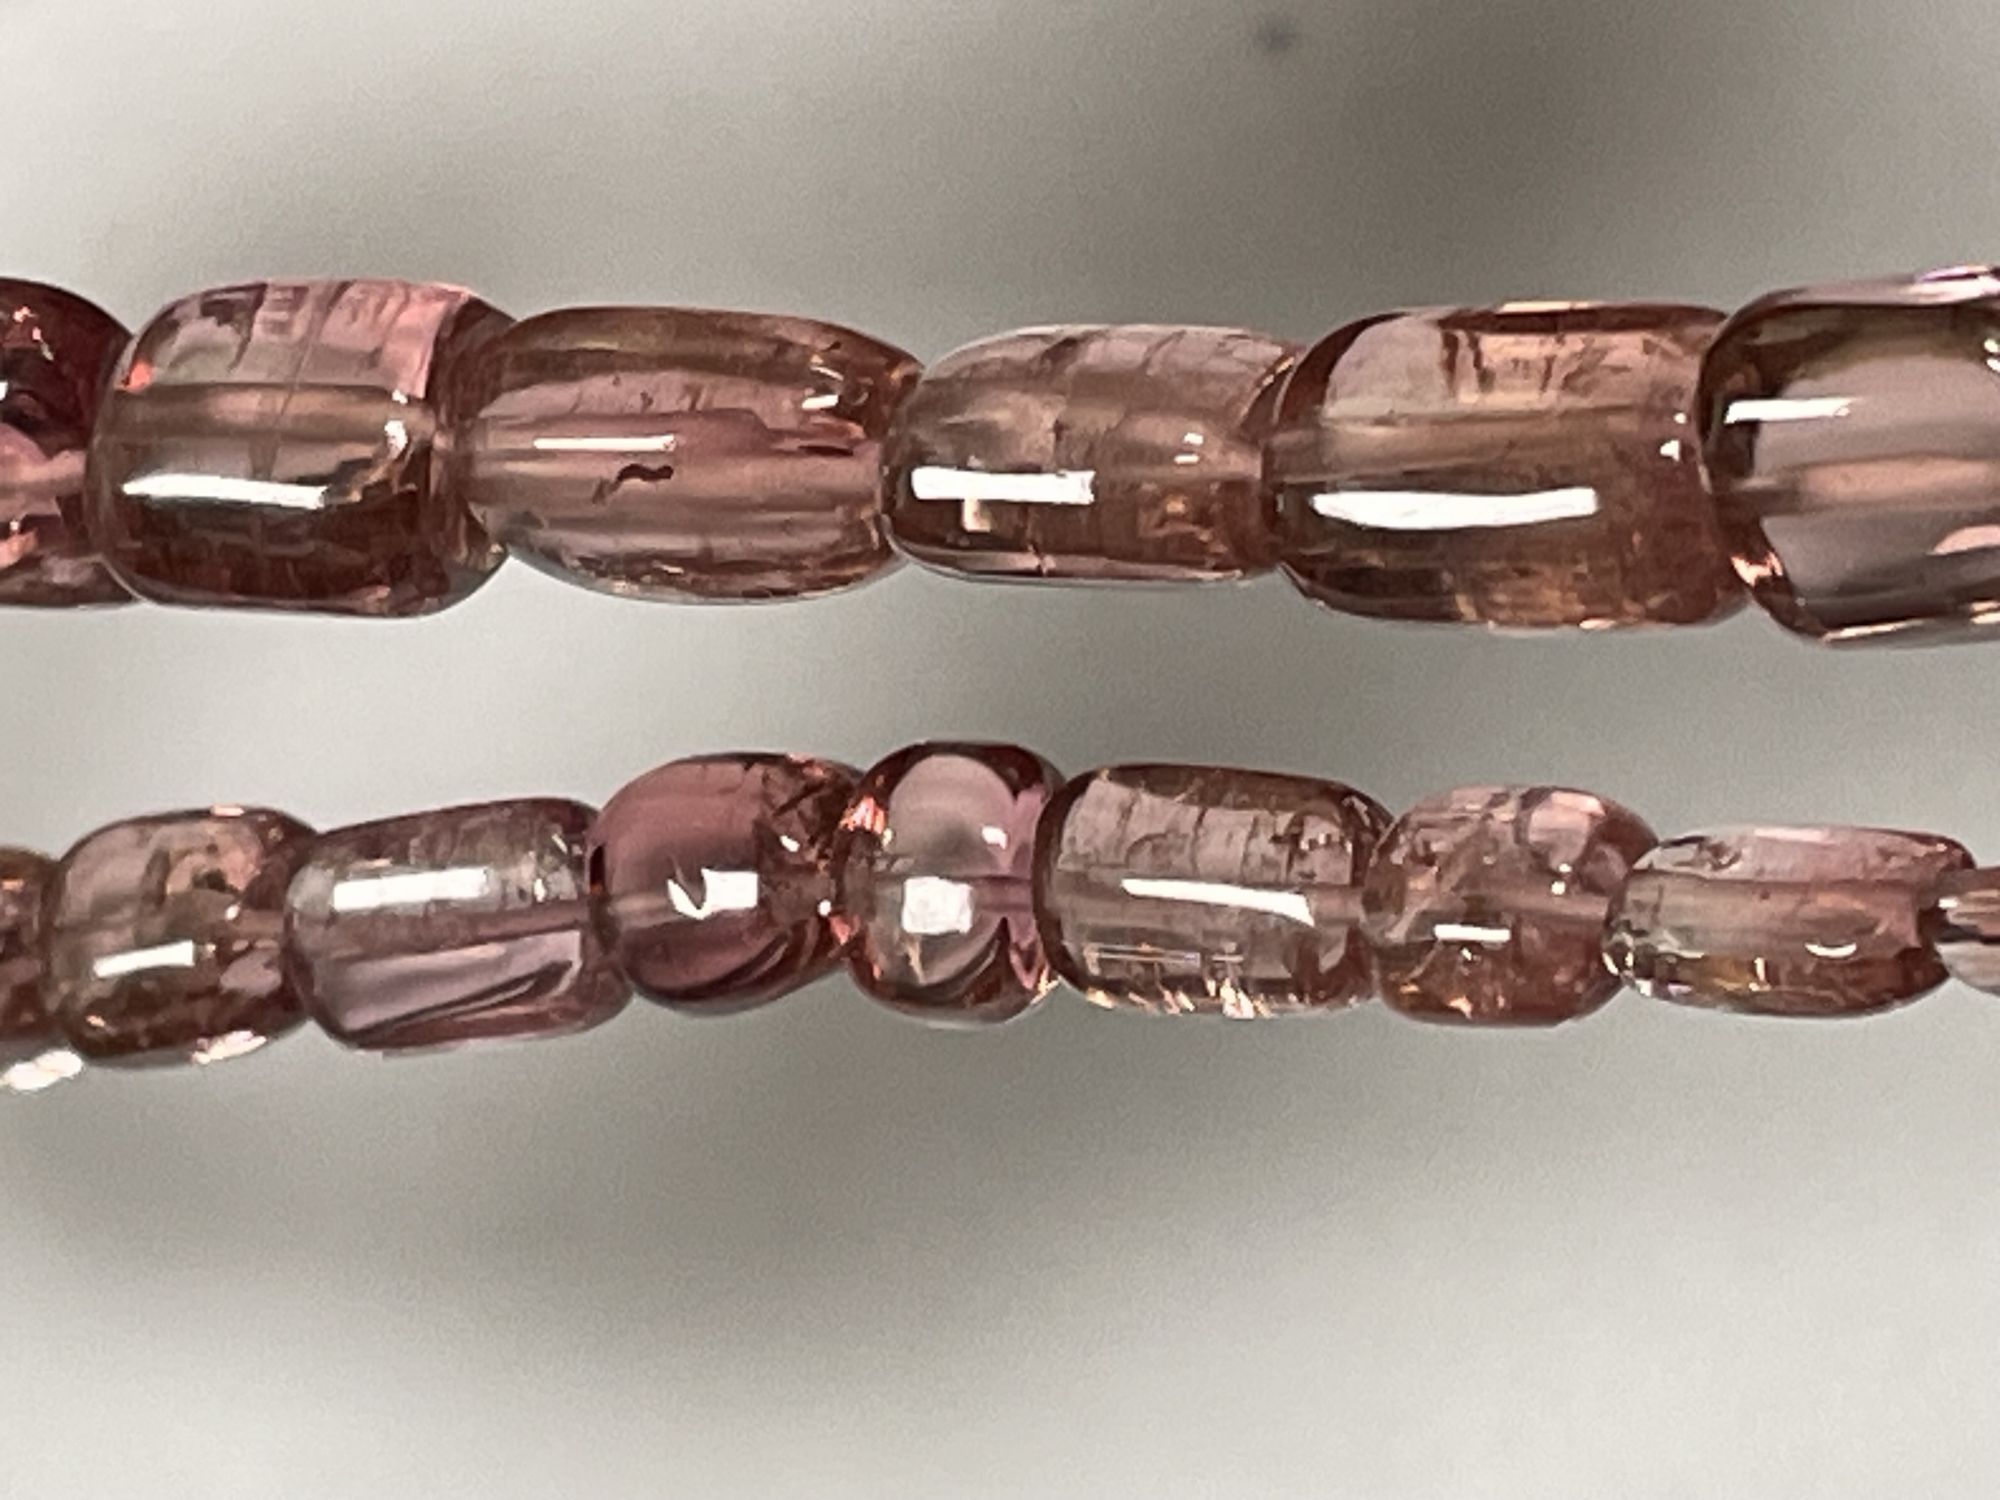 Pink Tourmaline Tube Smooth Necklace